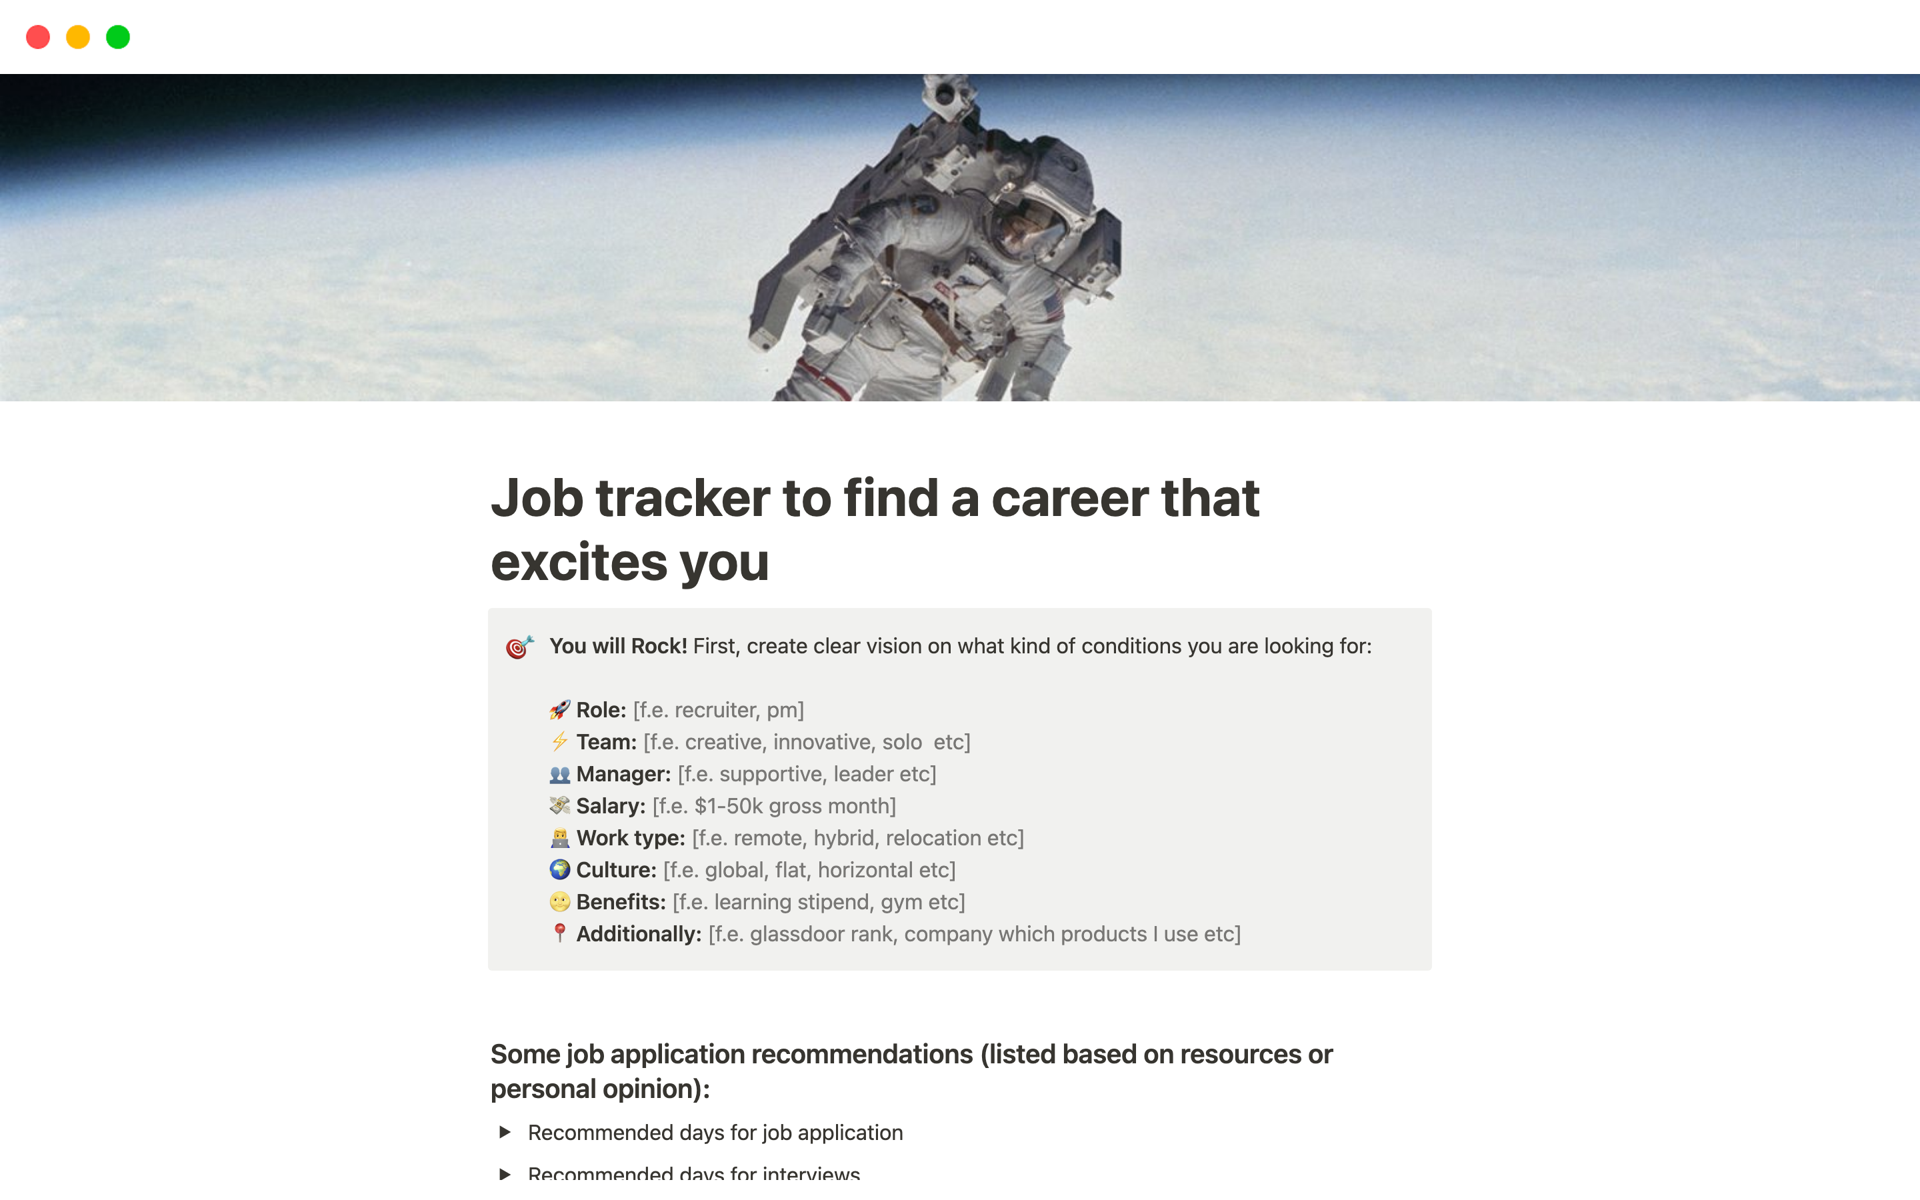 Job tracker that can help you to land a job in a qualitative time and approach